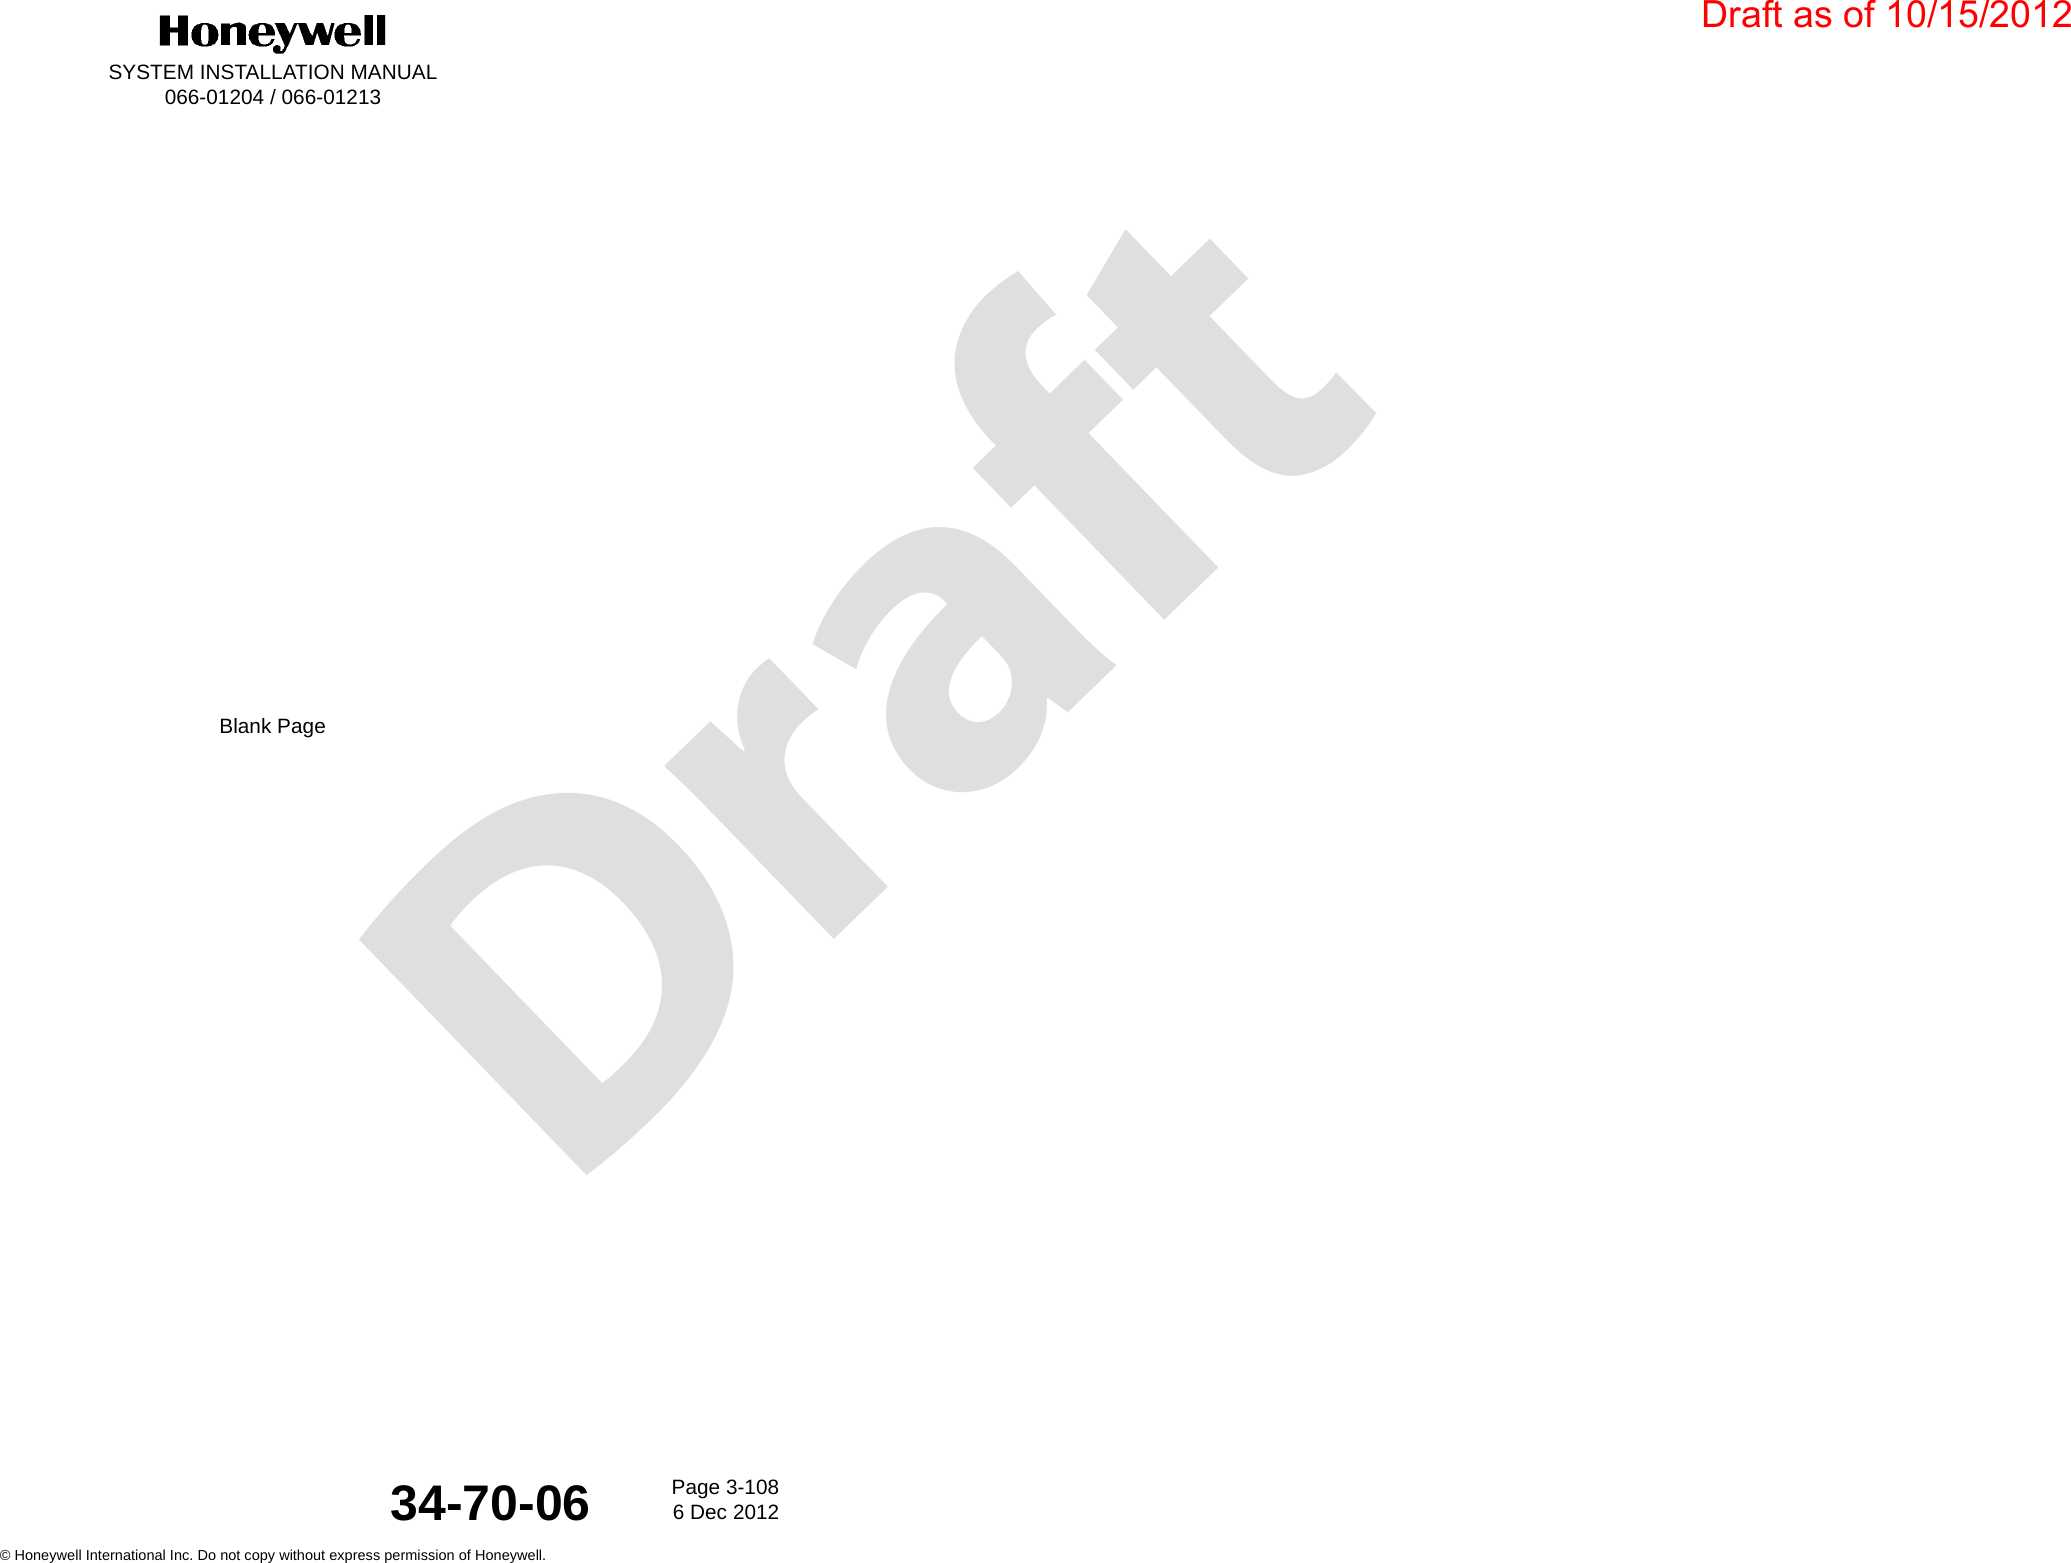 DraftSYSTEM INSTALLATION MANUAL066-01204 / 066-01213Page 3-1086 Dec 2012© Honeywell International Inc. Do not copy without express permission of Honeywell.34-70-06Blank PageDraft as of 10/15/2012